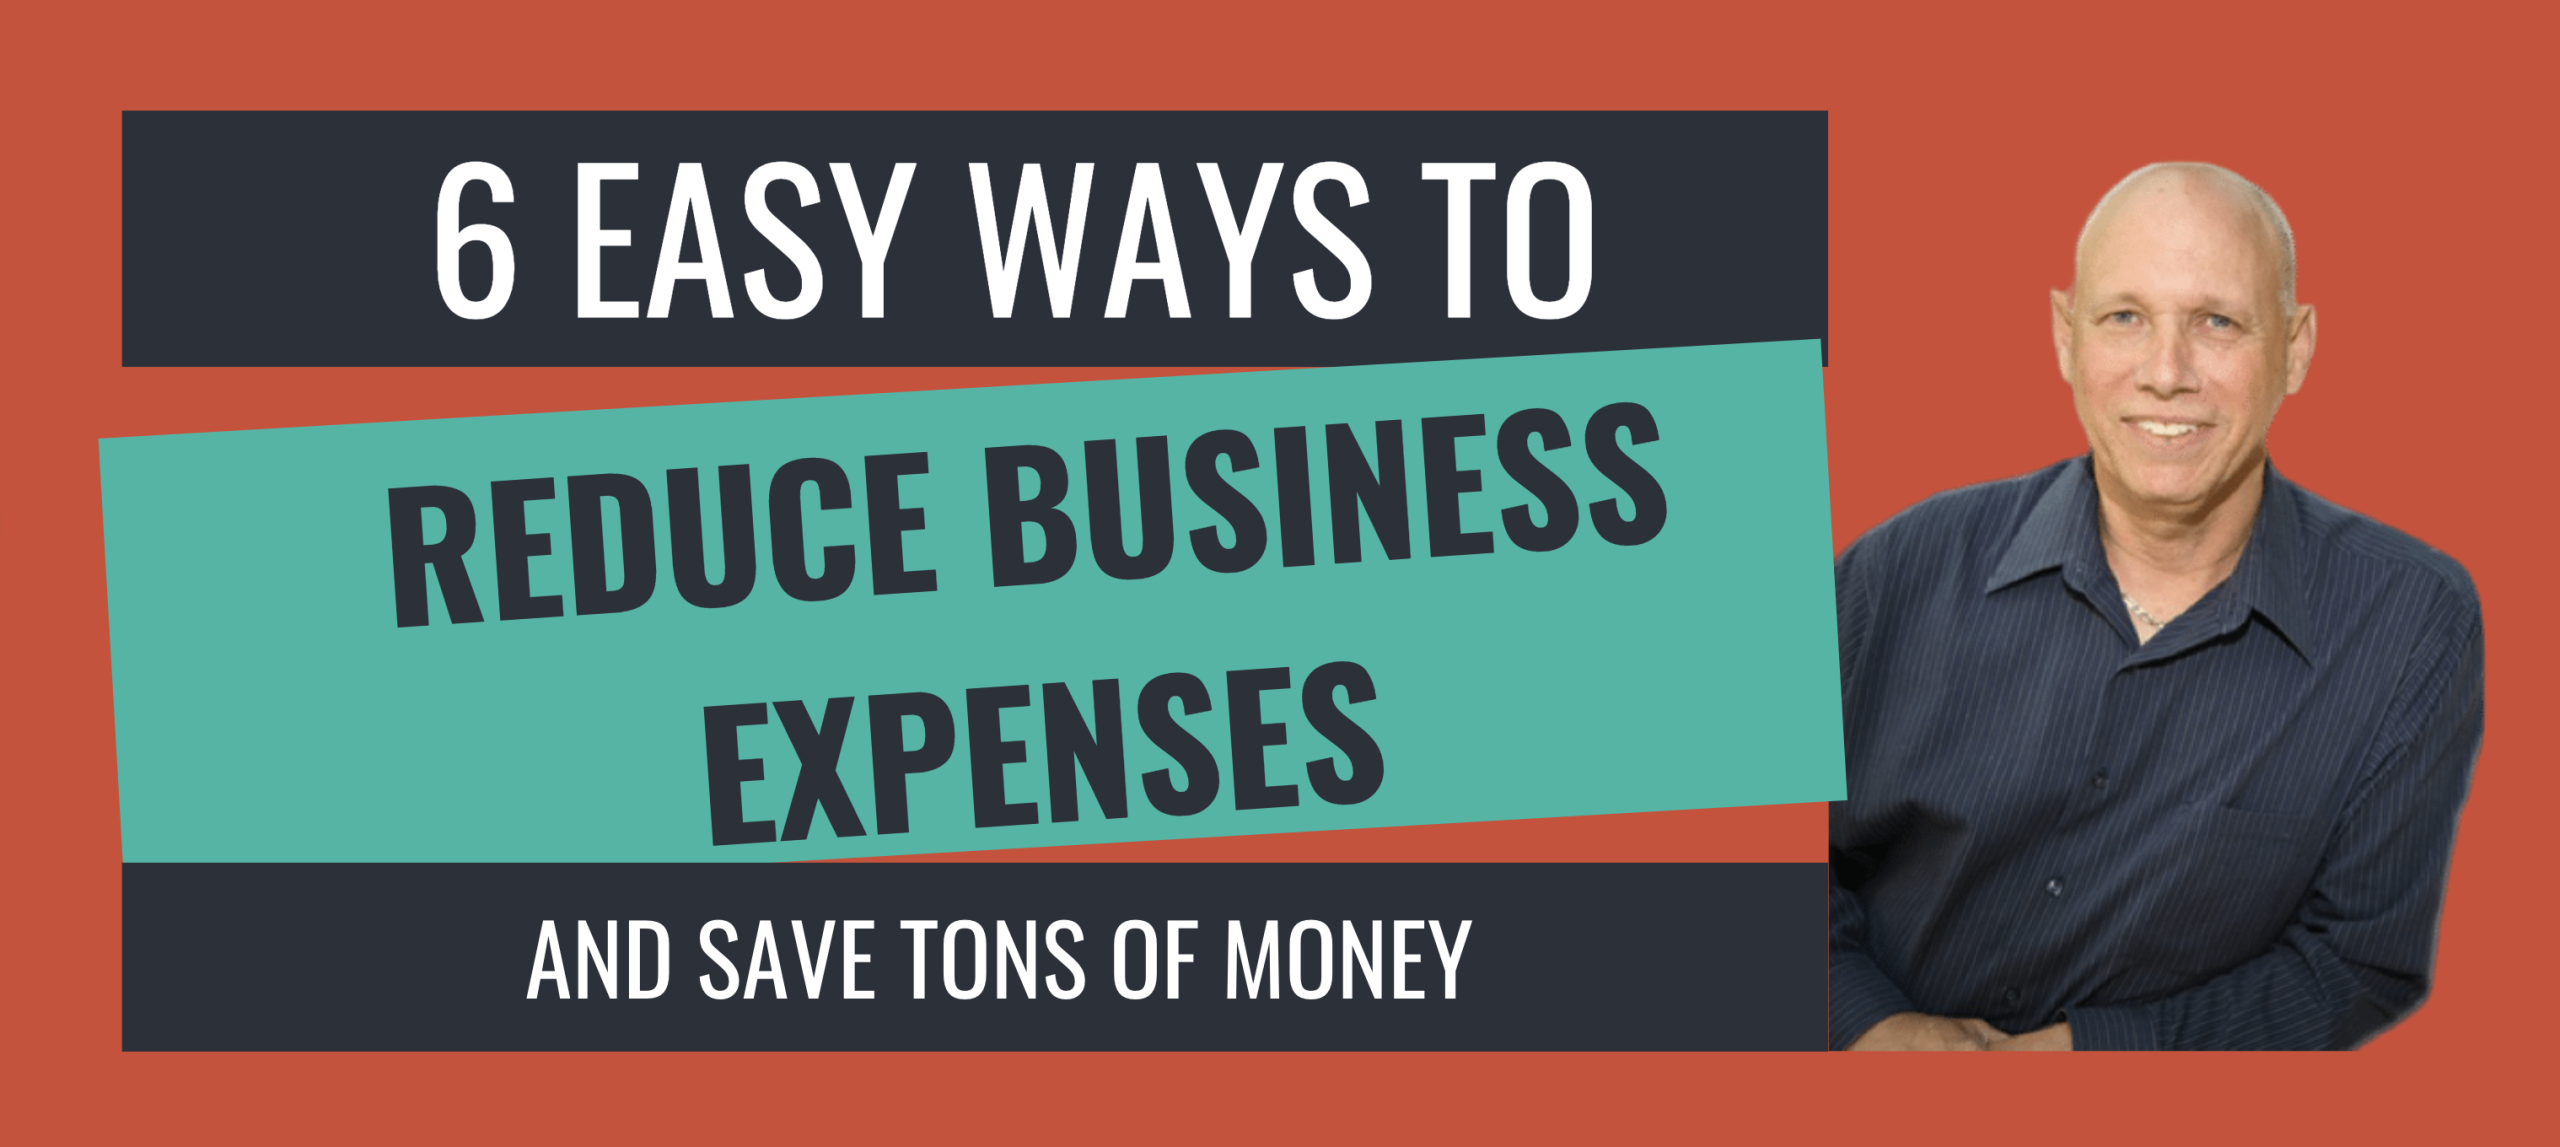 6 Easy Ways To Reduce Business Expenses And Save Money NOW!